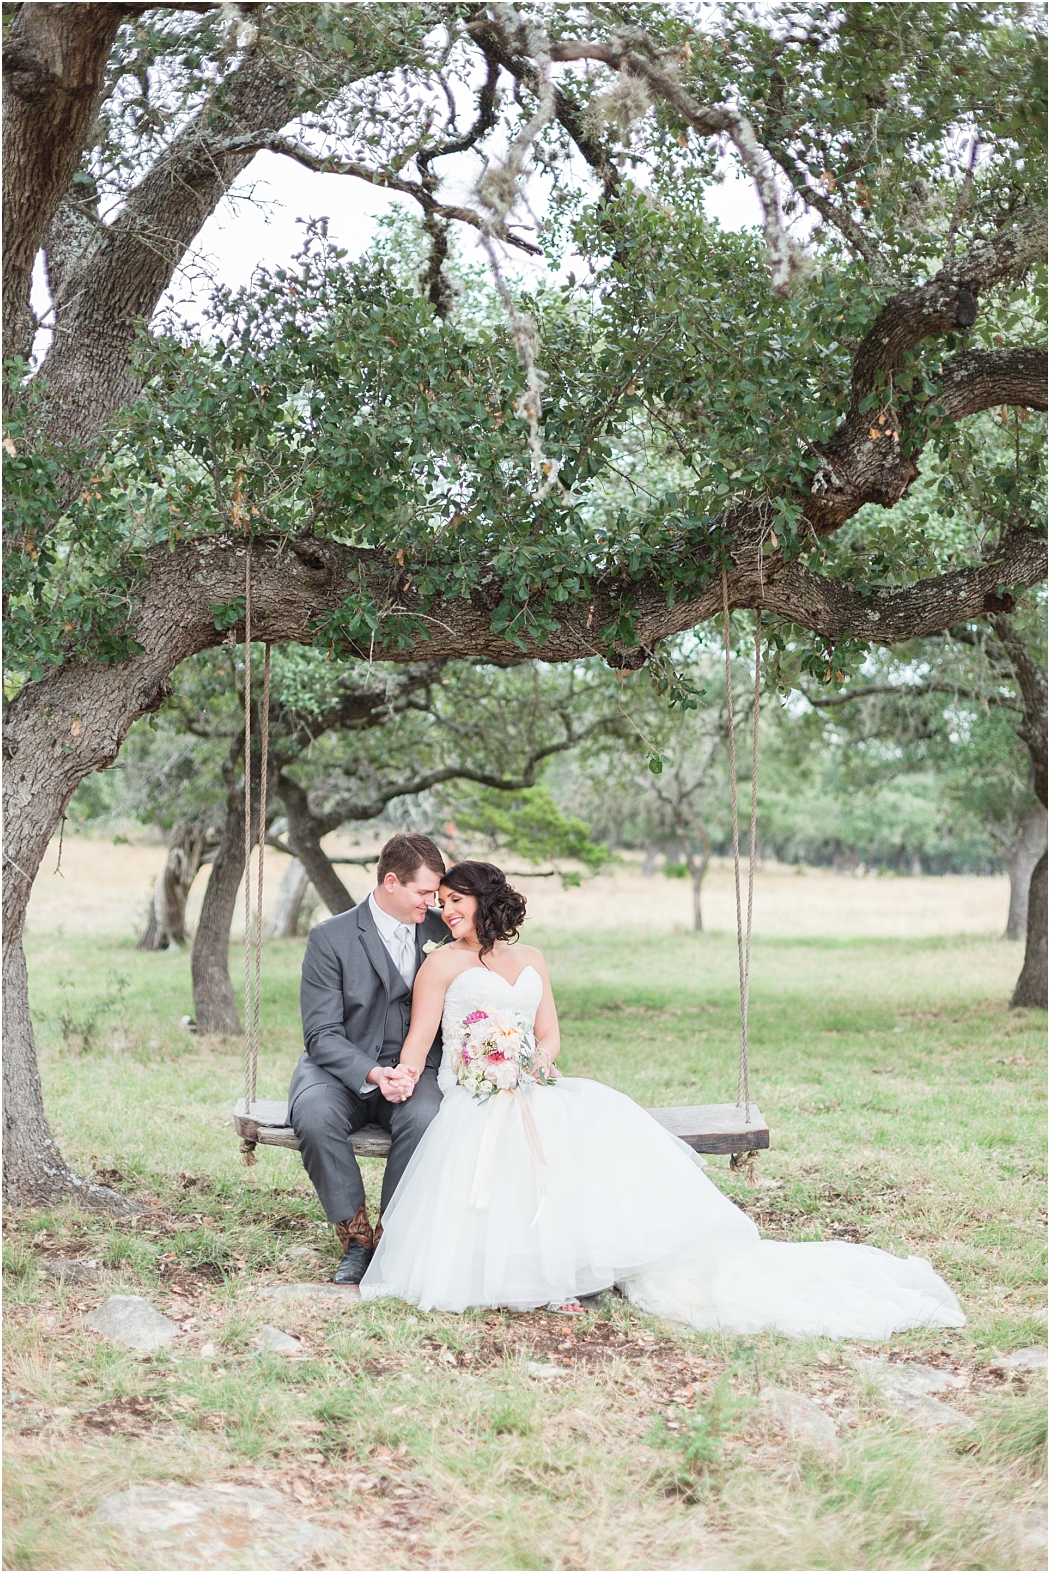 a-blush-cranberry-fall-wedding-at-cw-hill-country-ranch-in-boerne-texas-by-allison-jeffers-wedding-photography-boerne-wedding-photographer_0058